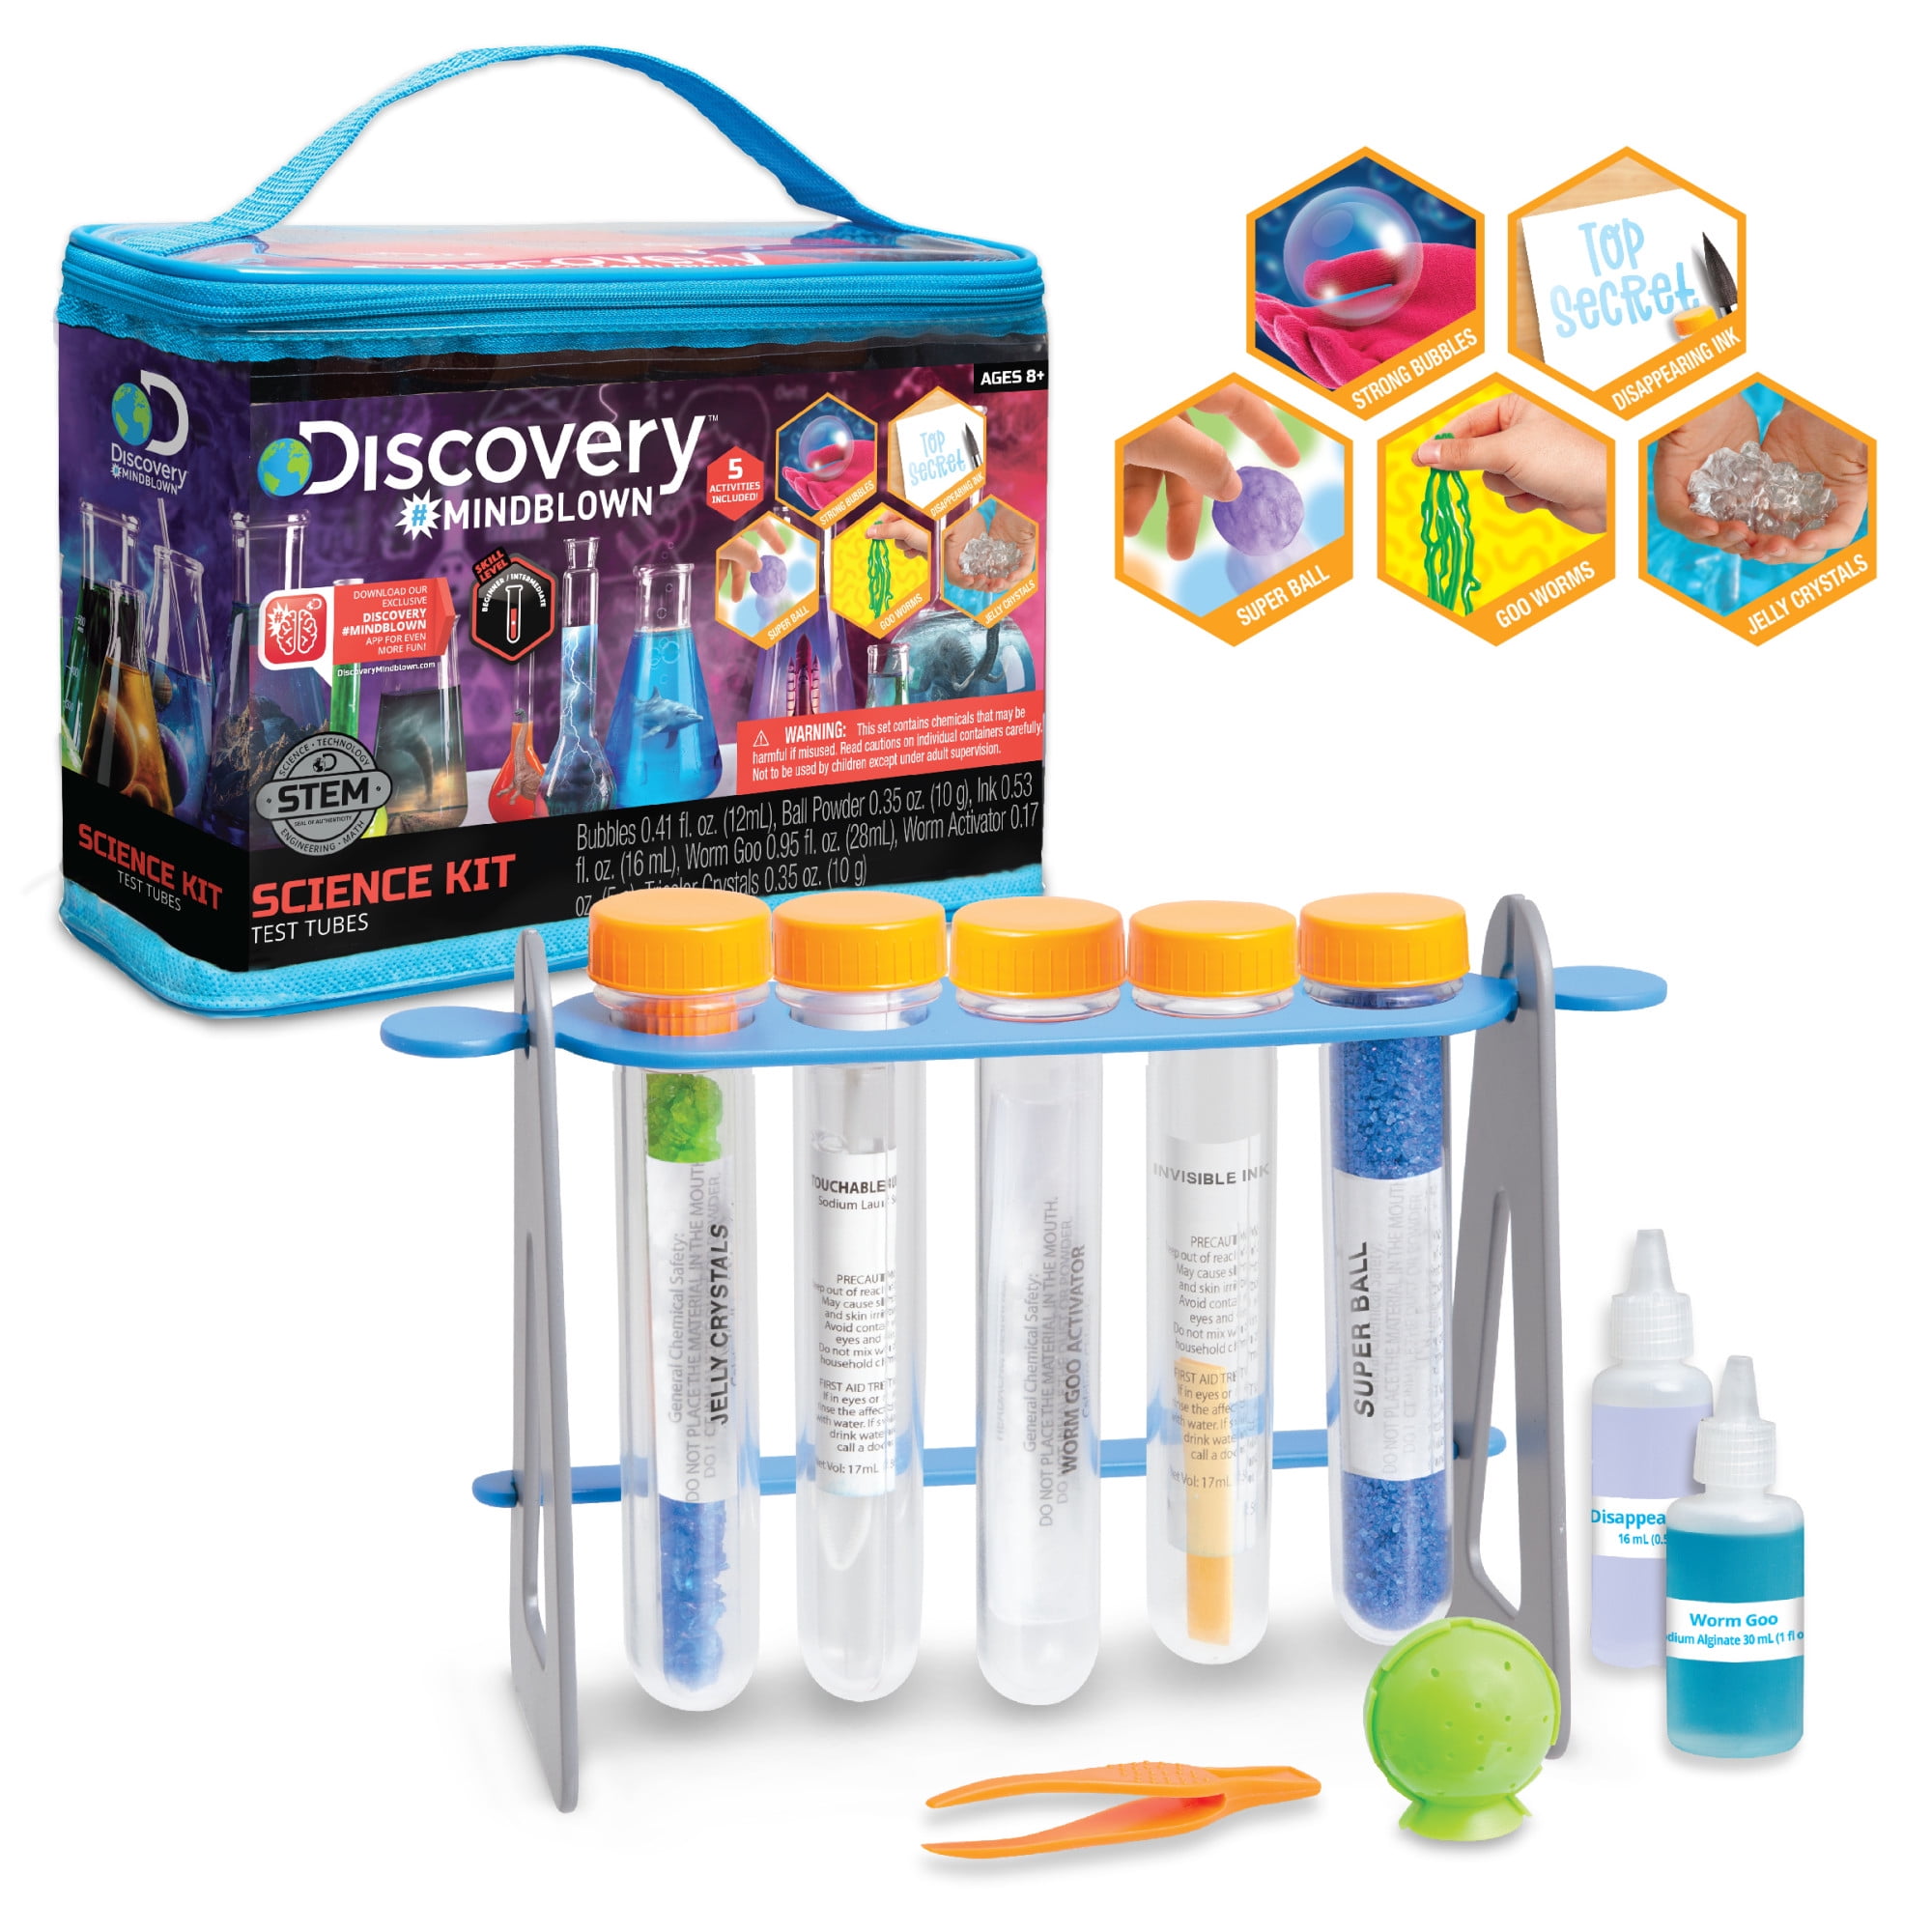 Discovery Mindblown The Ultimate Science Kit 17 Experiment Set for sale online 